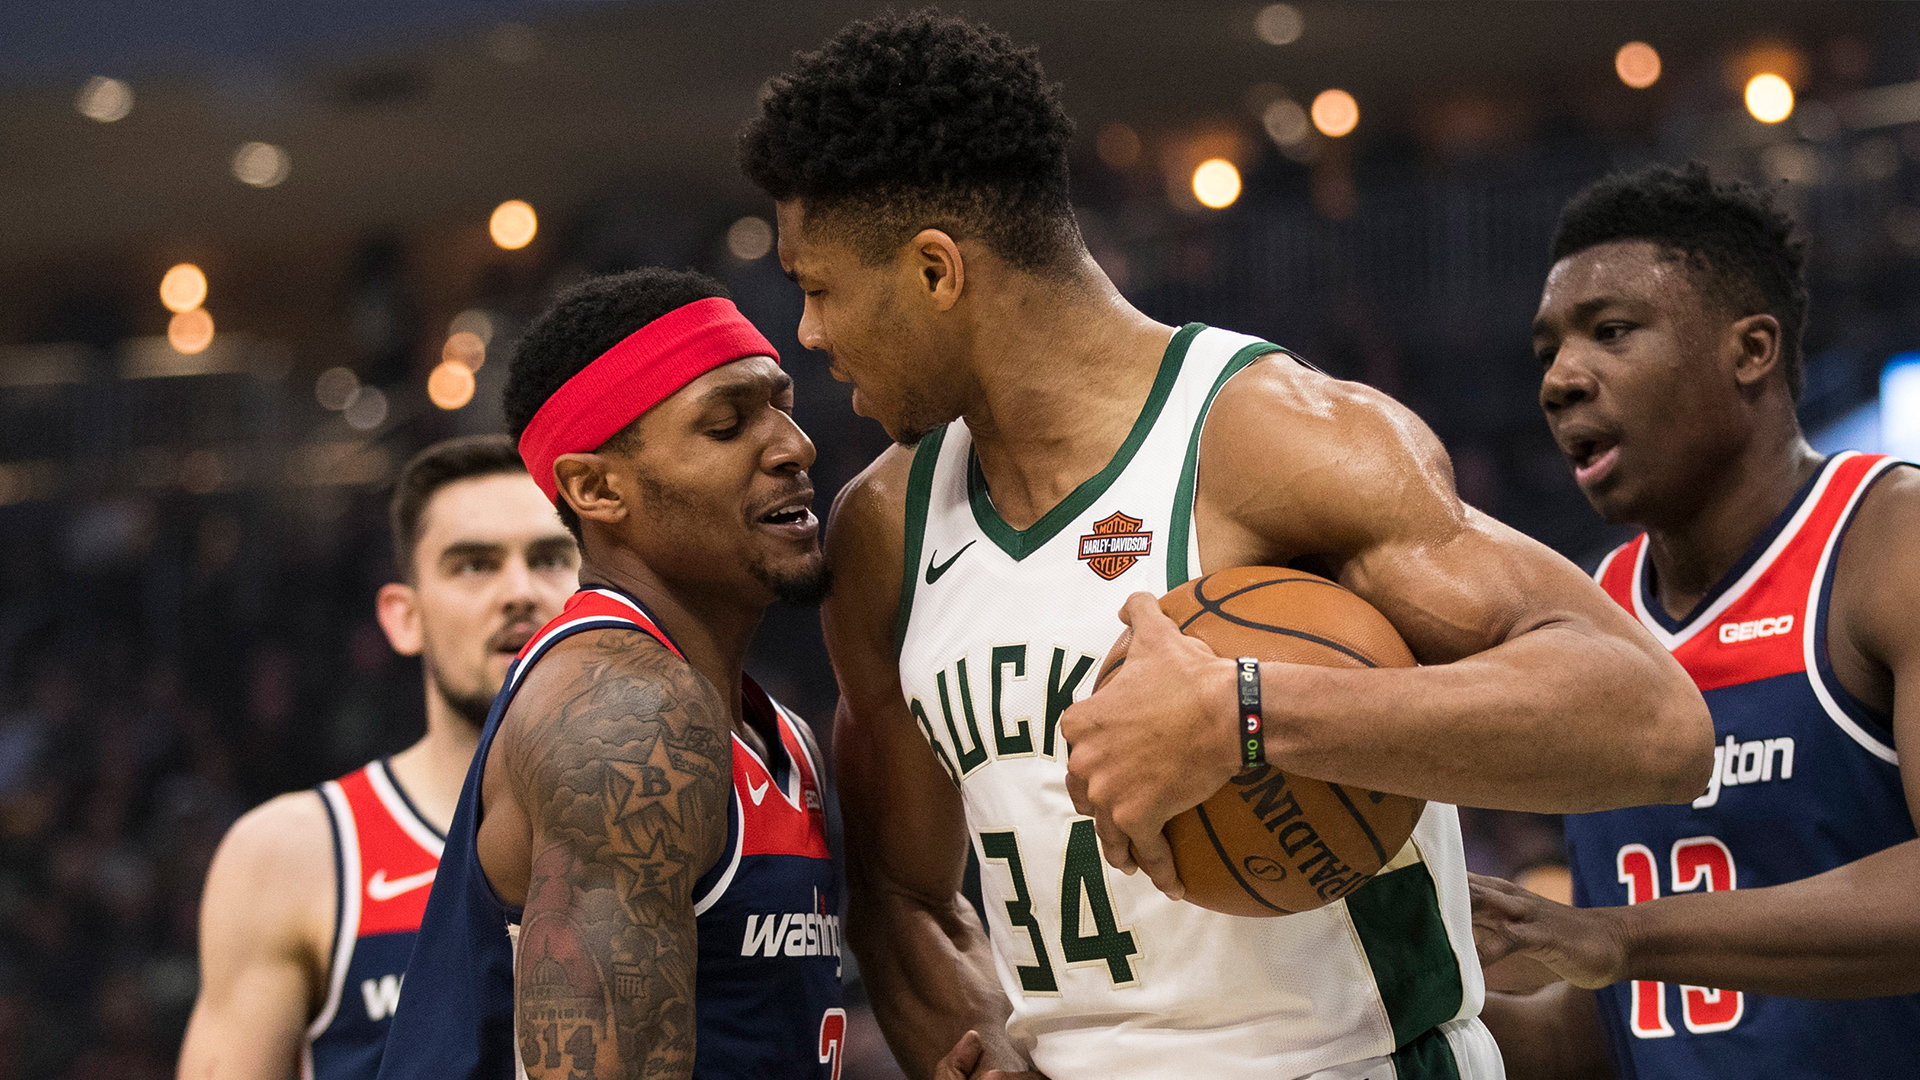 Report: Giannis Antetokounmpo Urged Bucks Front Office to Trade for Bradley Beal